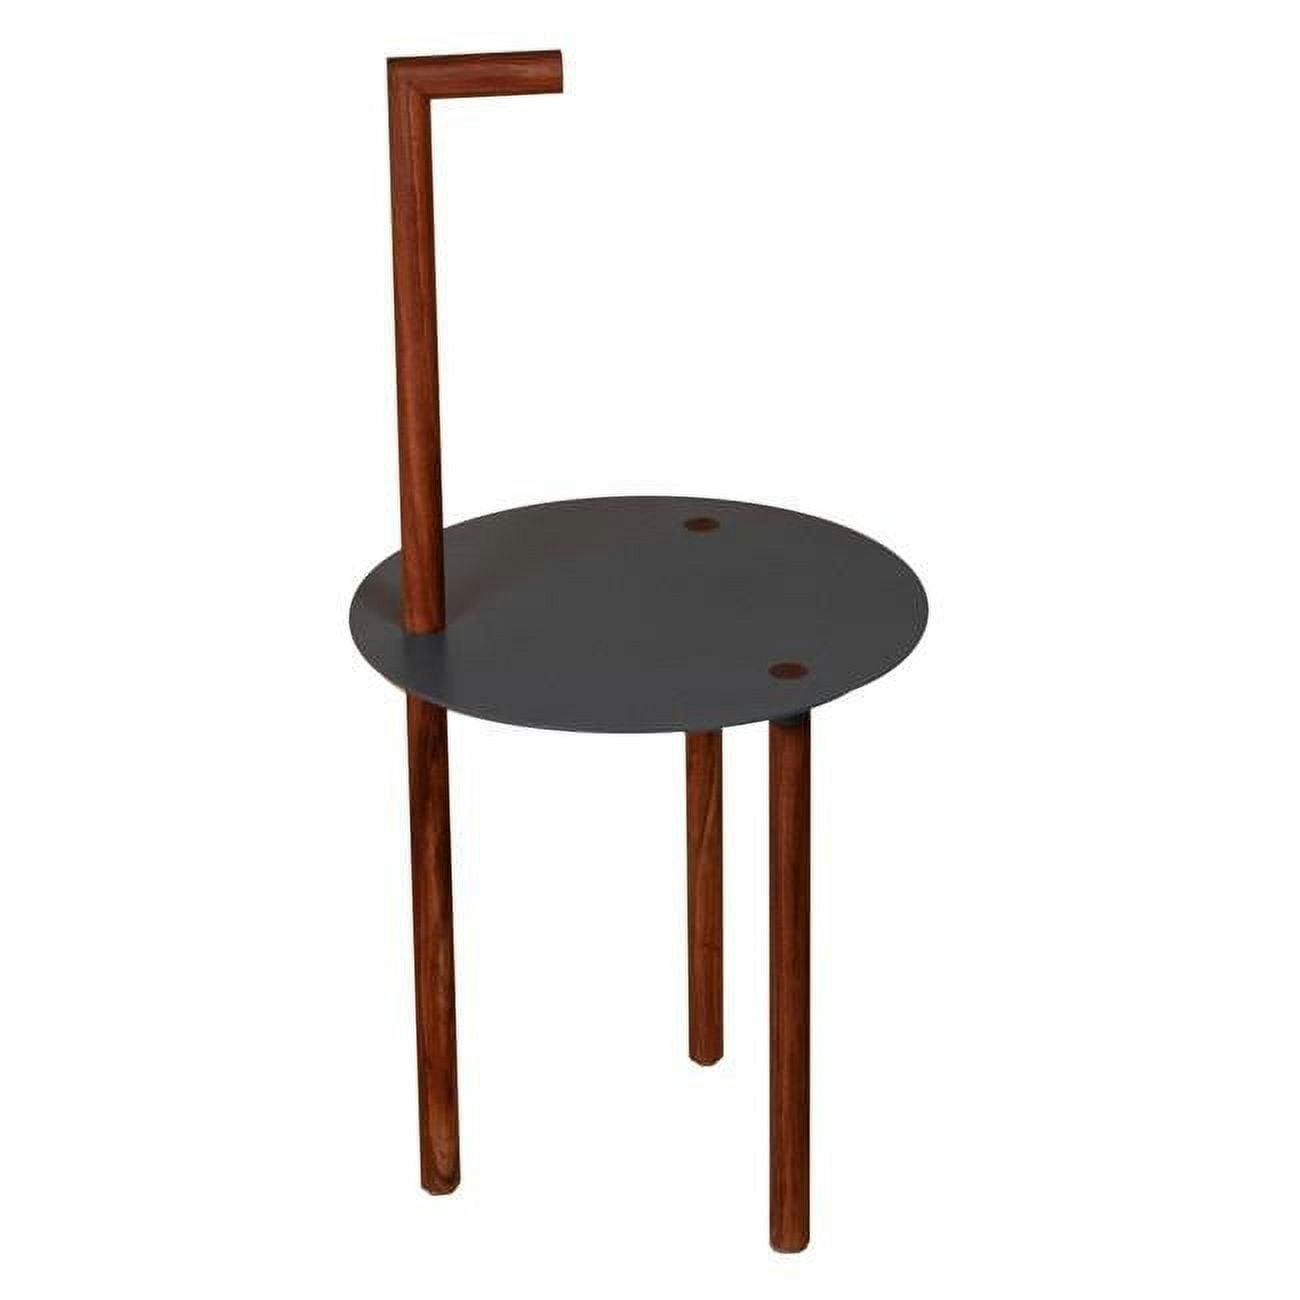 Transitional Round Metal & Wood End Table with Inbuilt Pole, Brown & Black